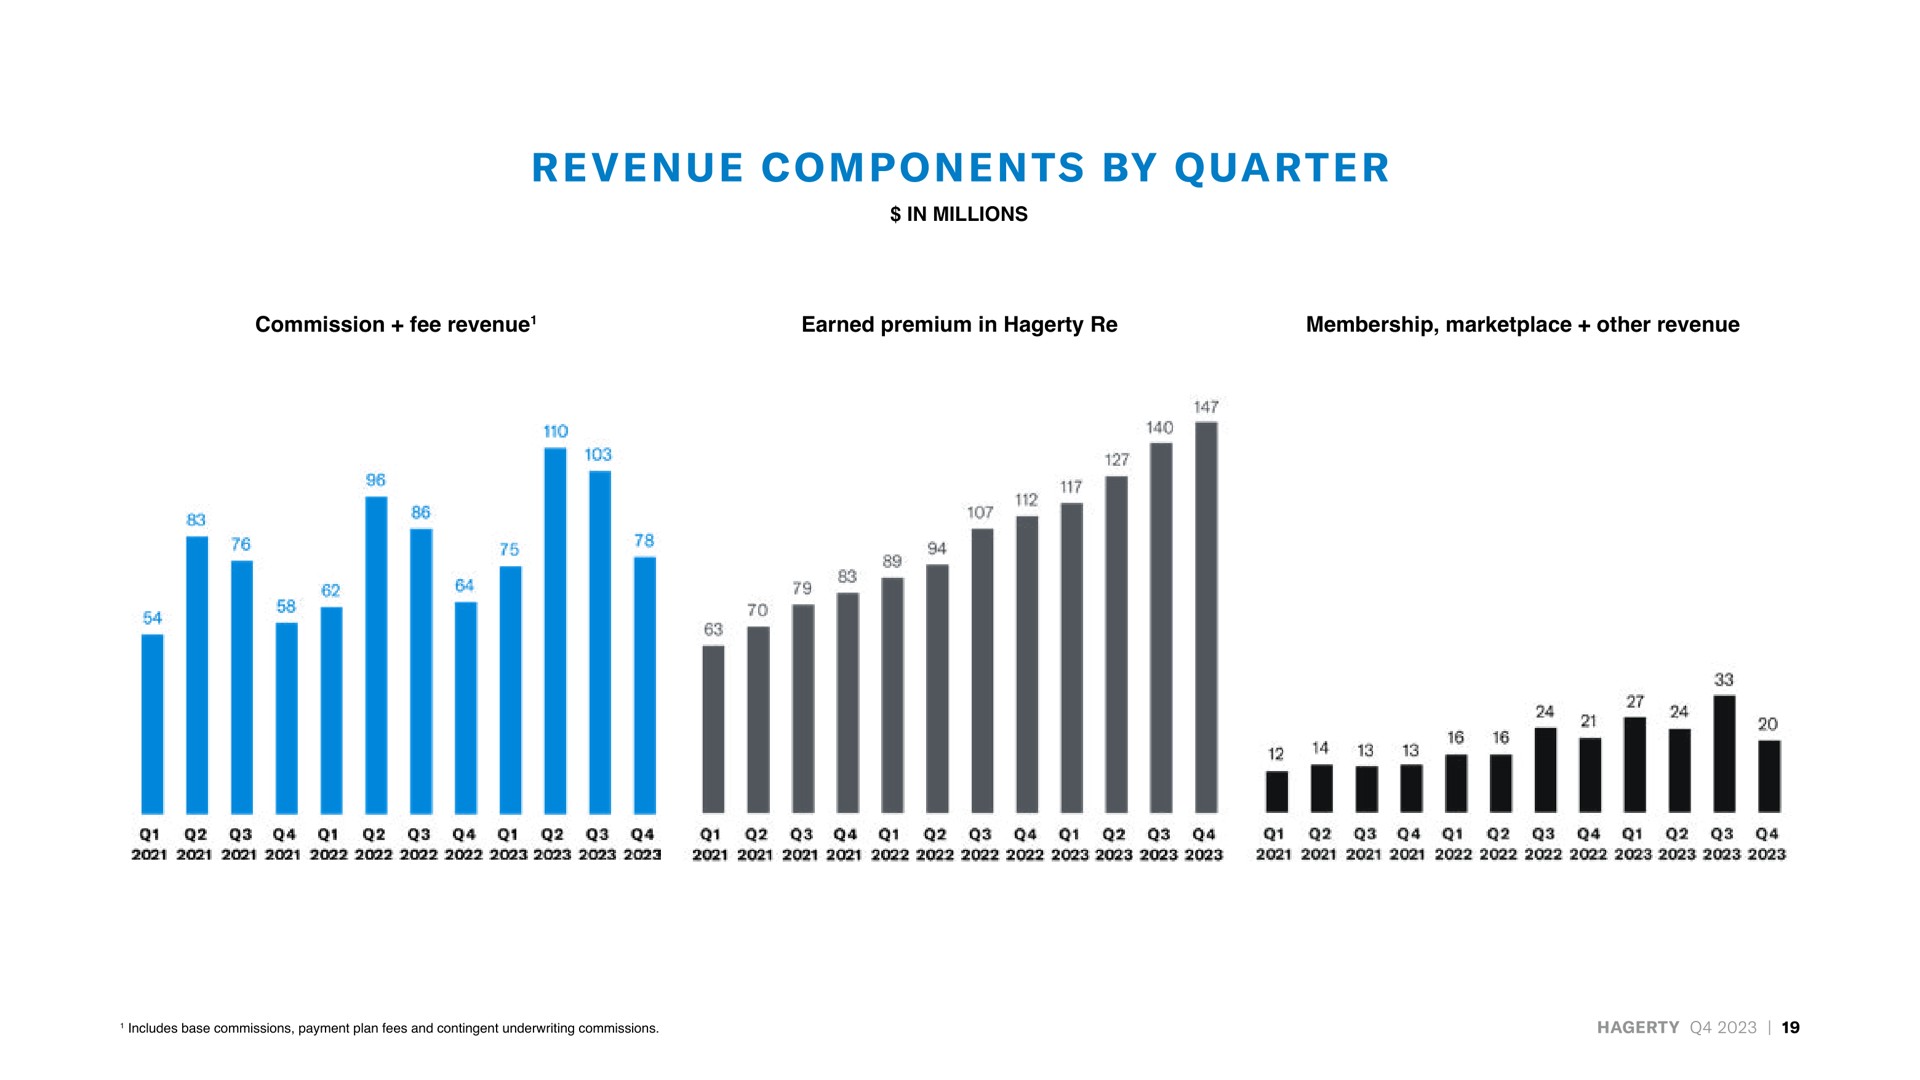 commission fee revenue earned premium in membership other revenue components by quarter | Hagerty